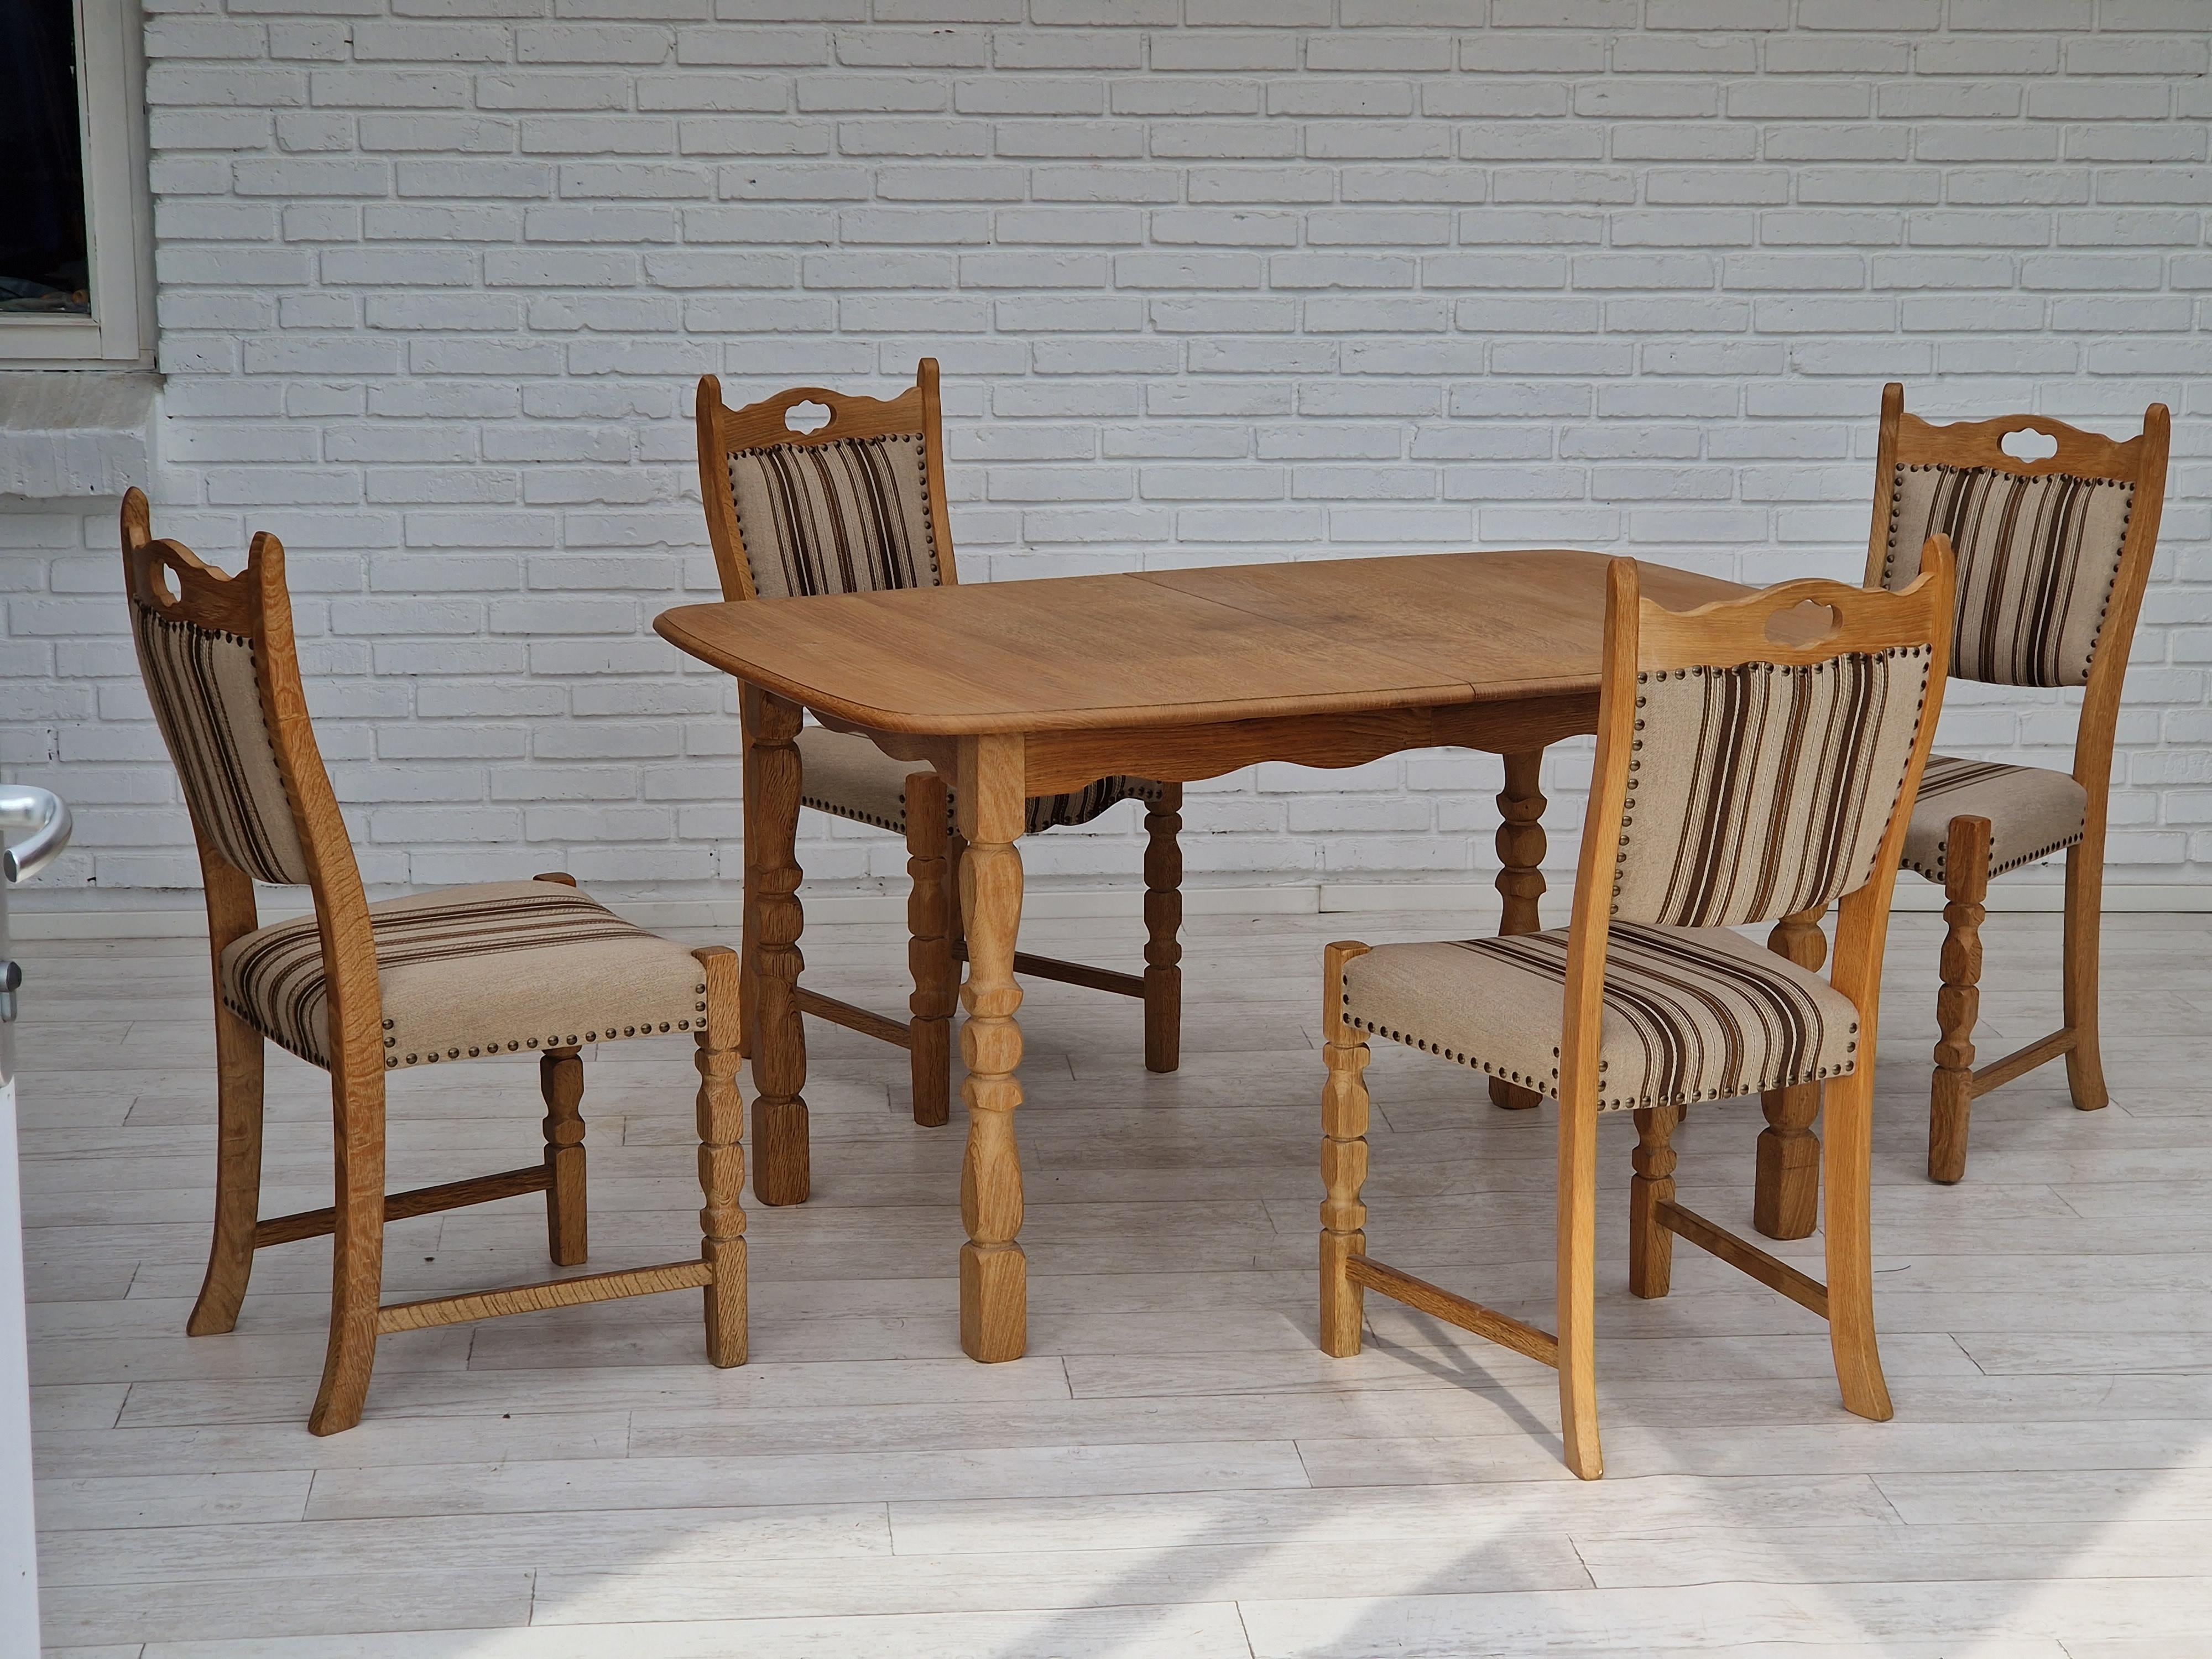 1970s, Danish design. Dinning set of unfolded table and four chairs. Oak wood, chair seats reupholstered in furniture wool. Solid oak wood original in very good condition. Folding table (with 3 additional plates - 50cm each ). Removable legs. Made